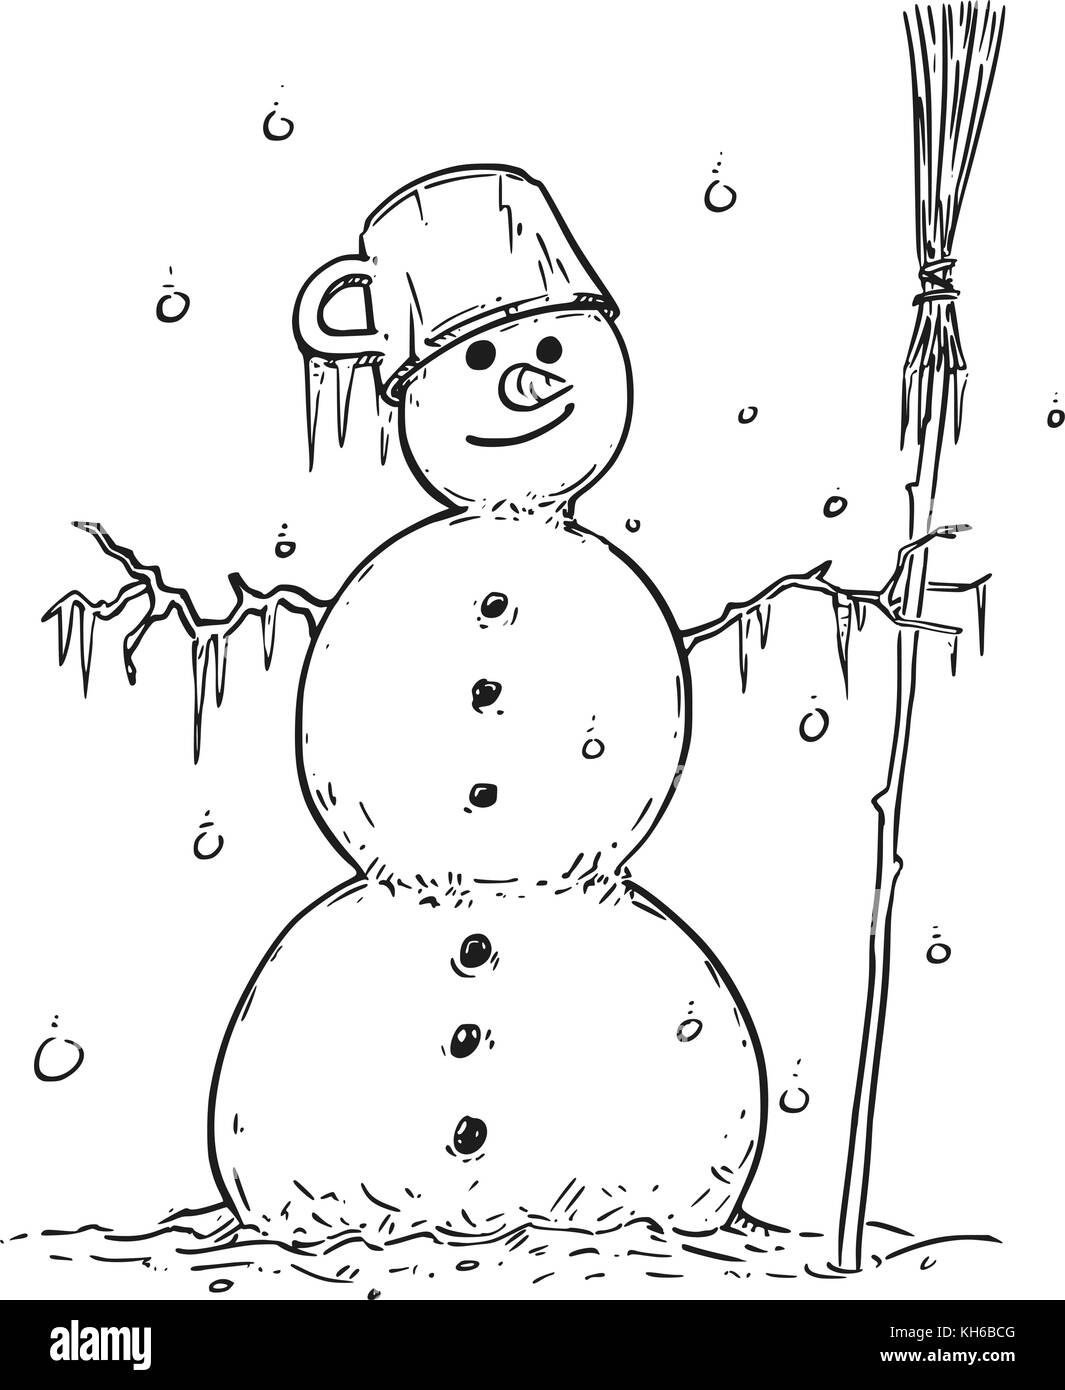 Cartoon Drawing Illustration Of Smiling Snowman With Broom And Pot On Stock Vector Image Art Alamy